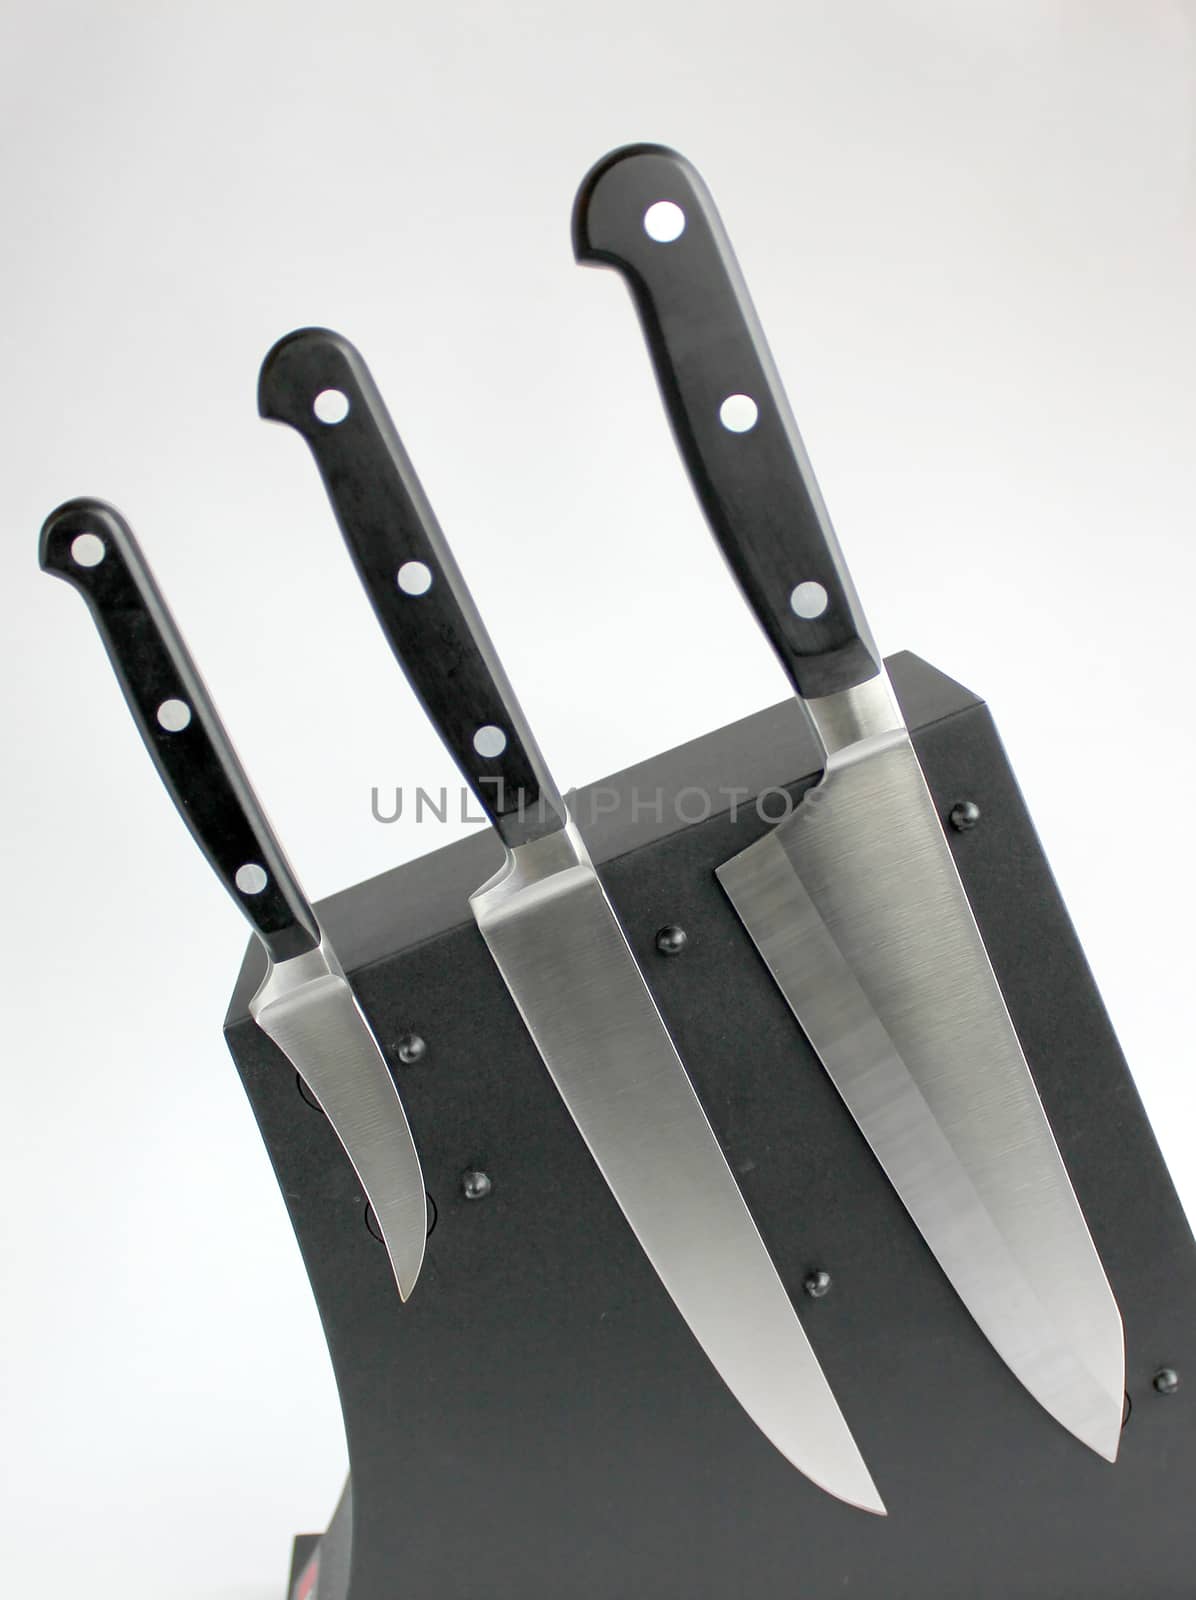 "The cook three" kitchen knifes on a magnetic support